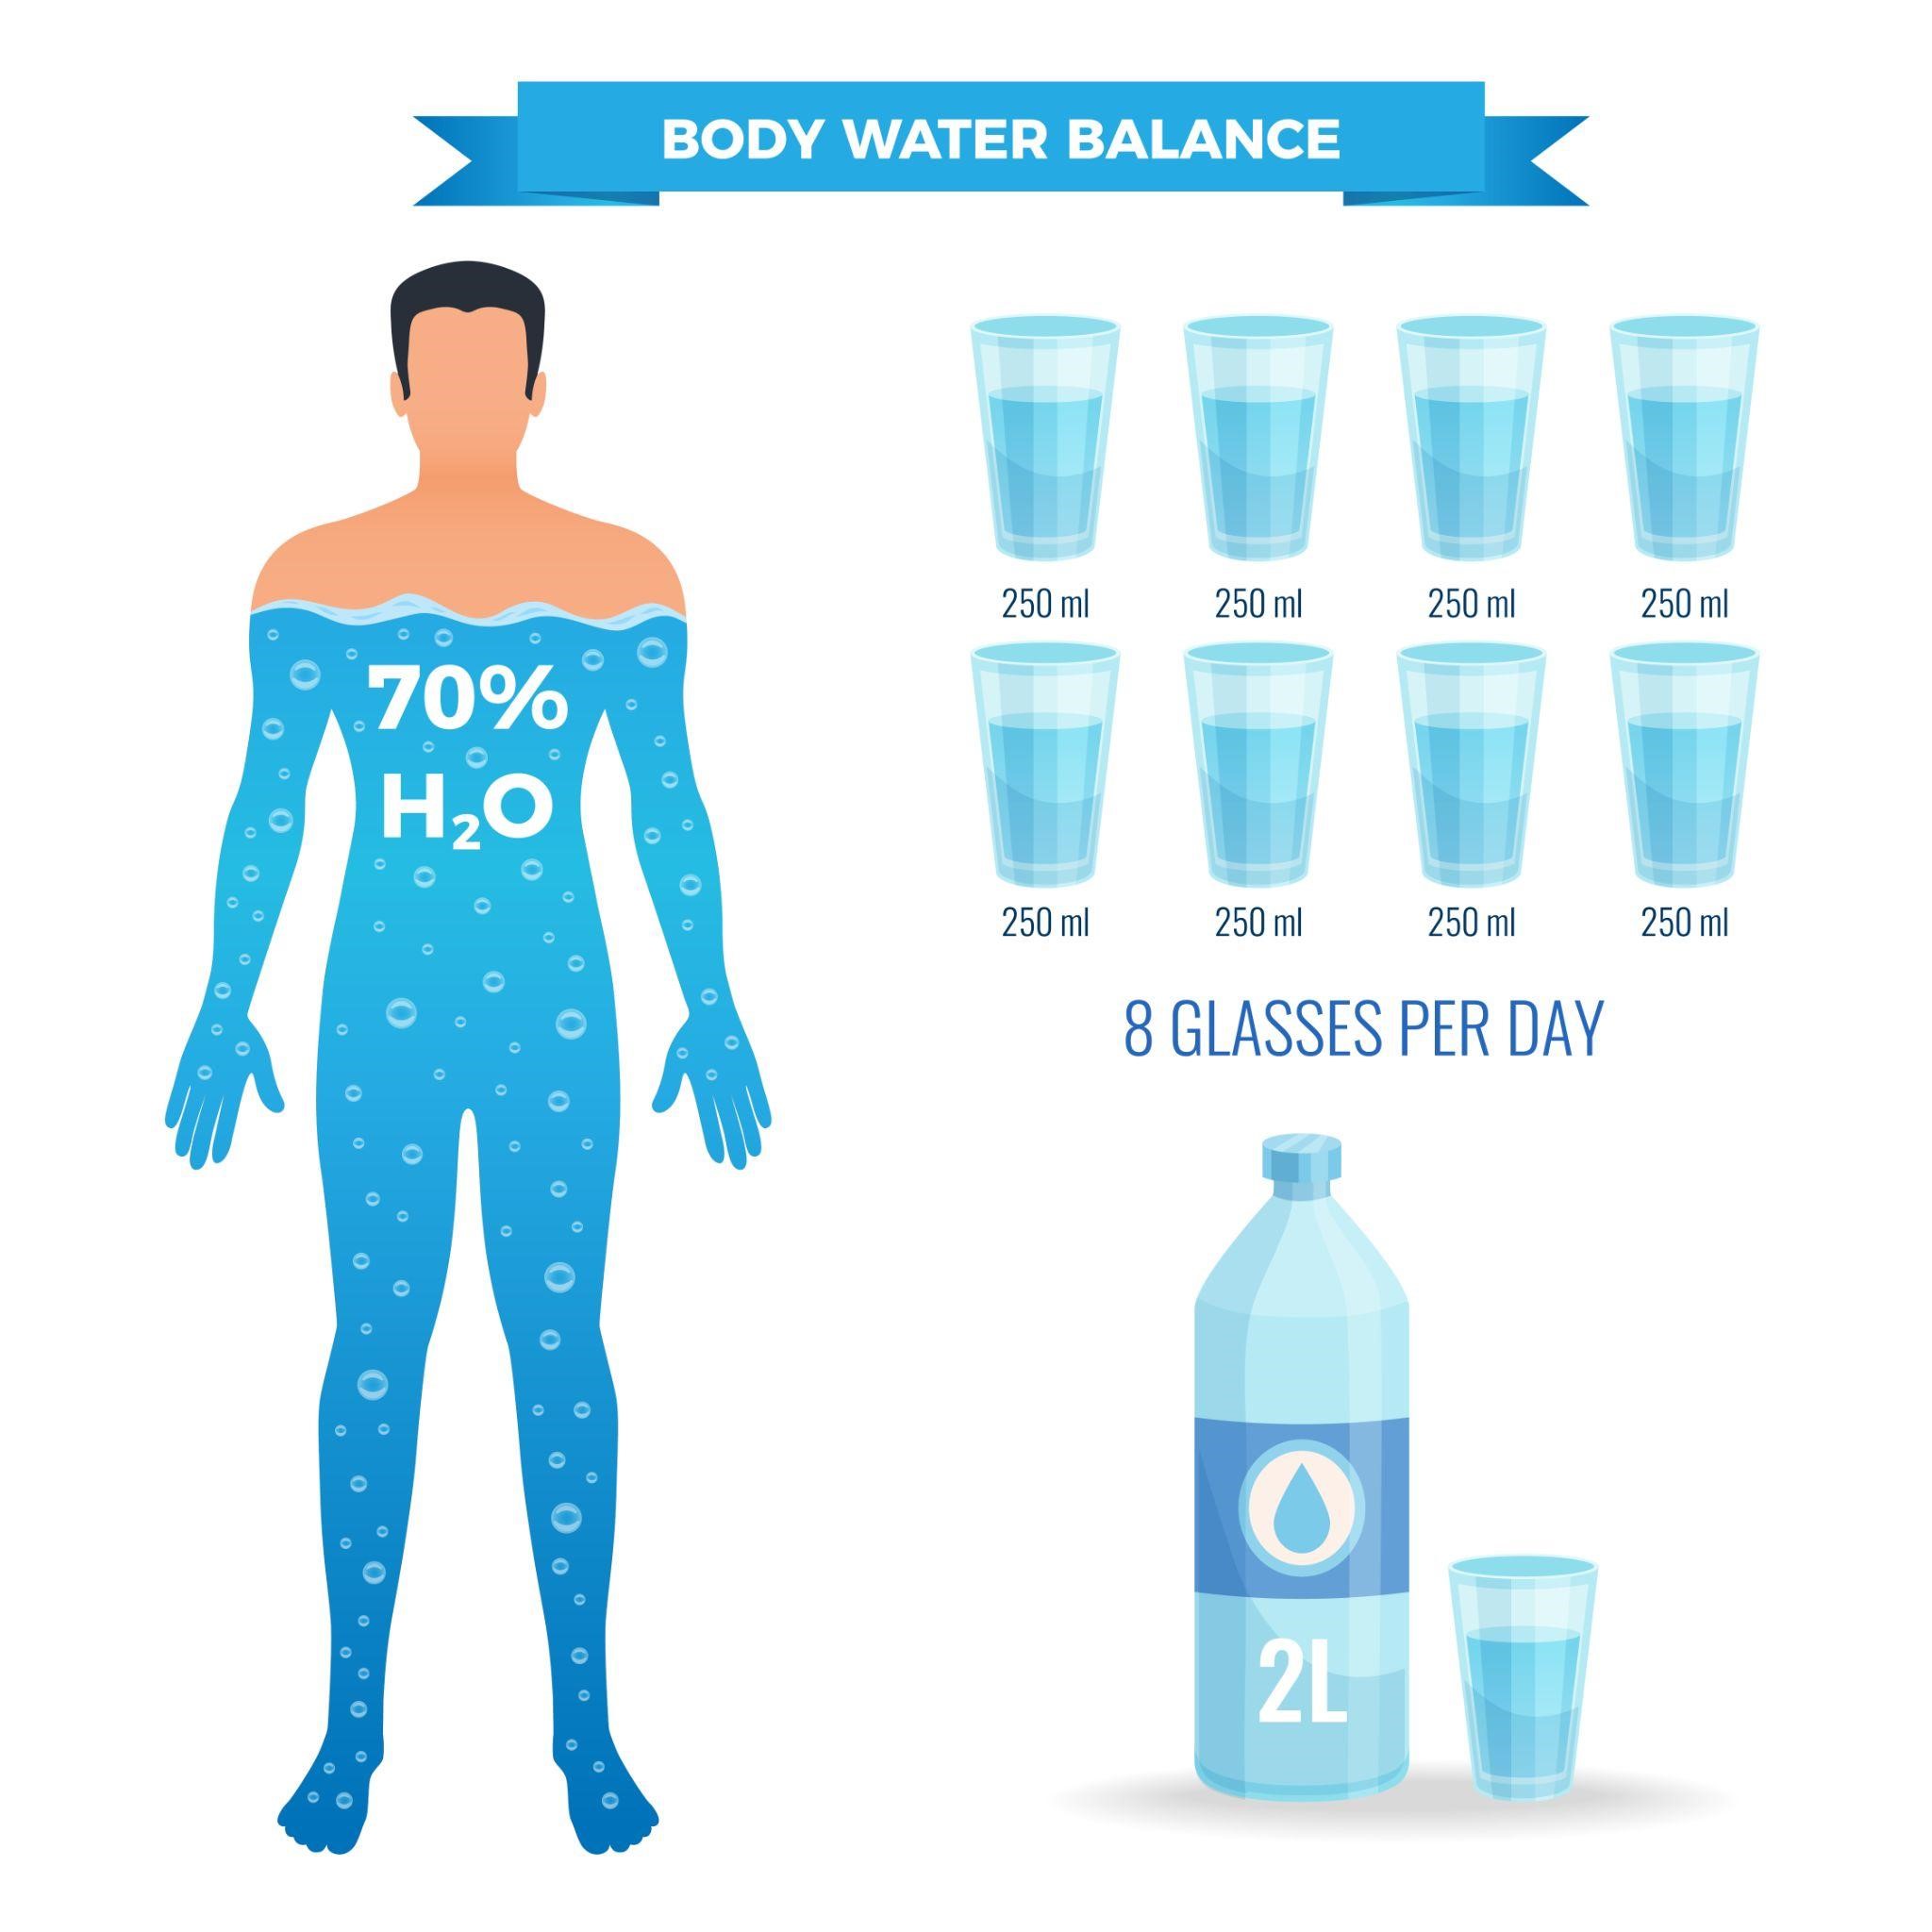 How much Water should you drink every day